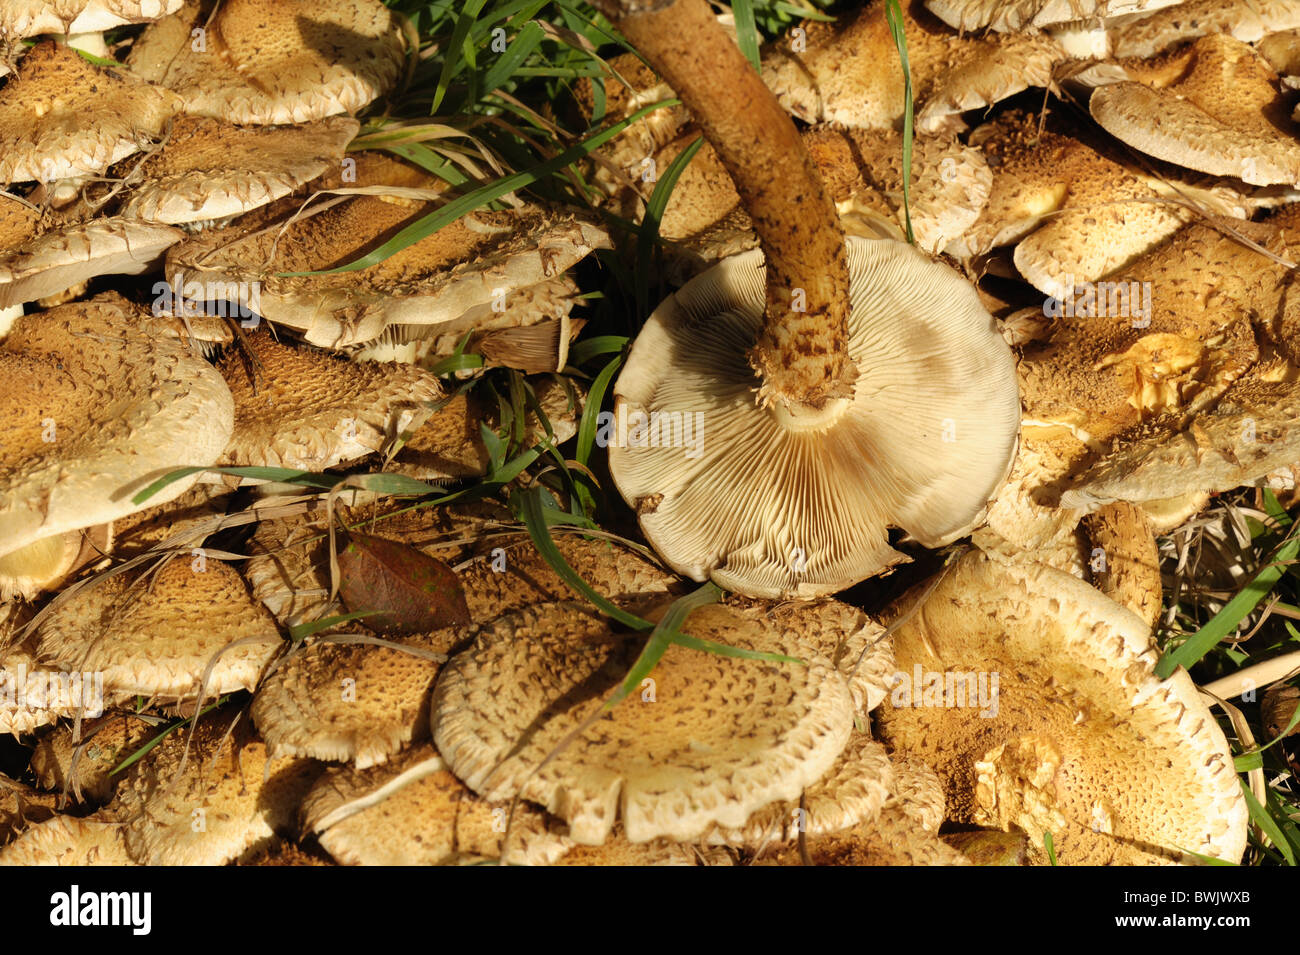 Fruiting bodies of honey fungus (Armillaria mellea) around the base of an old apple tree in autumn Stock Photo